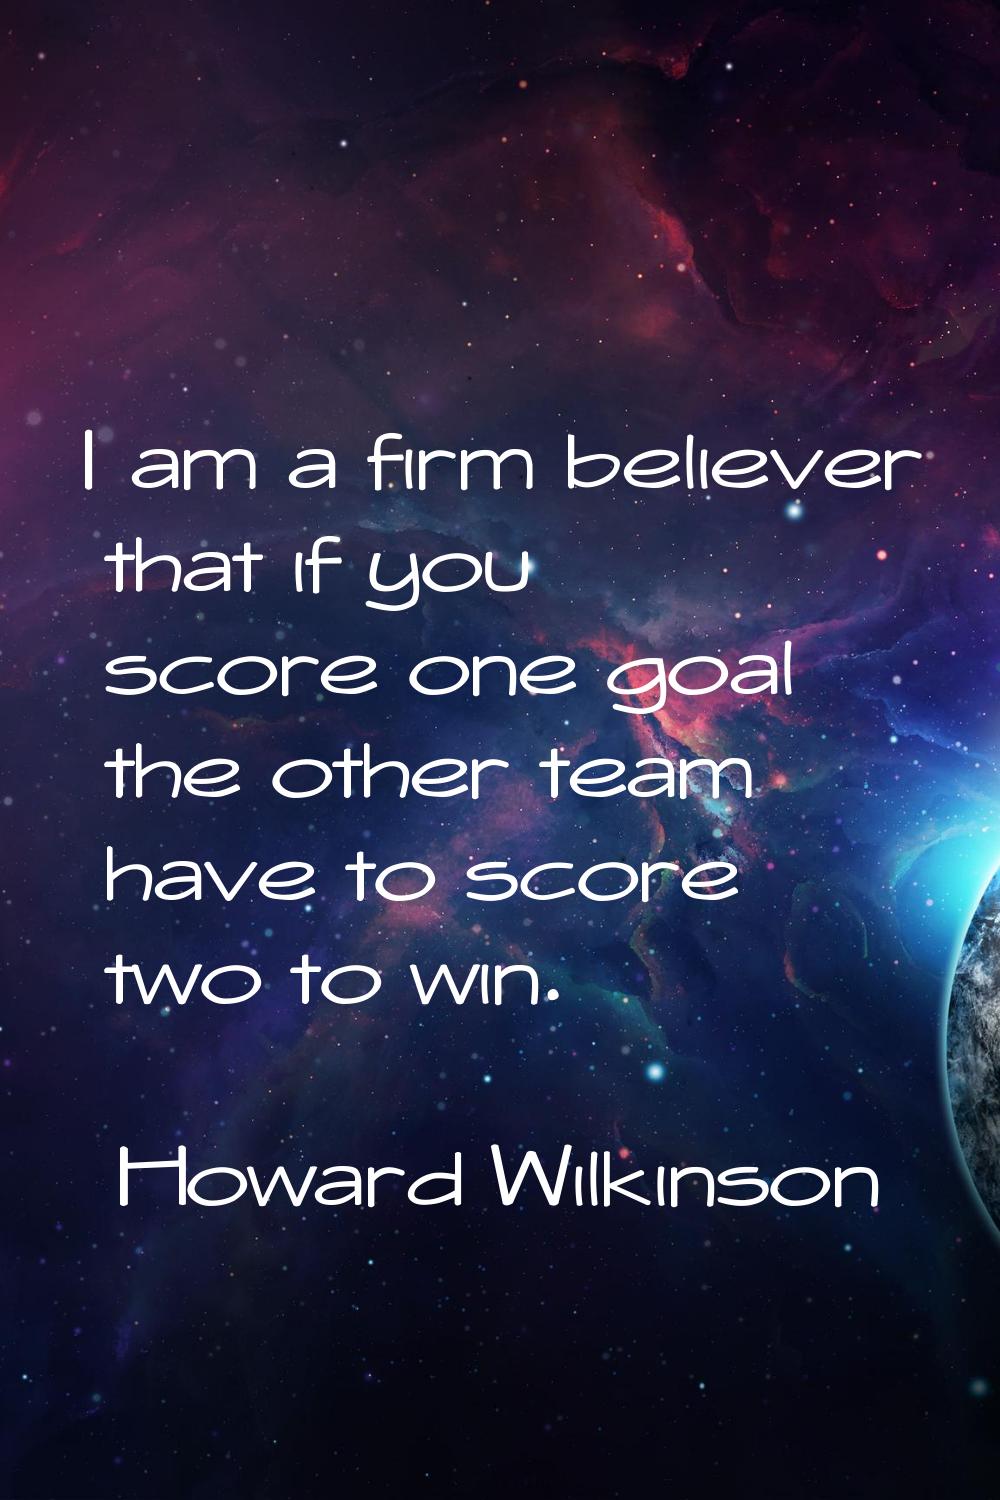 I am a firm believer that if you score one goal the other team have to score two to win.